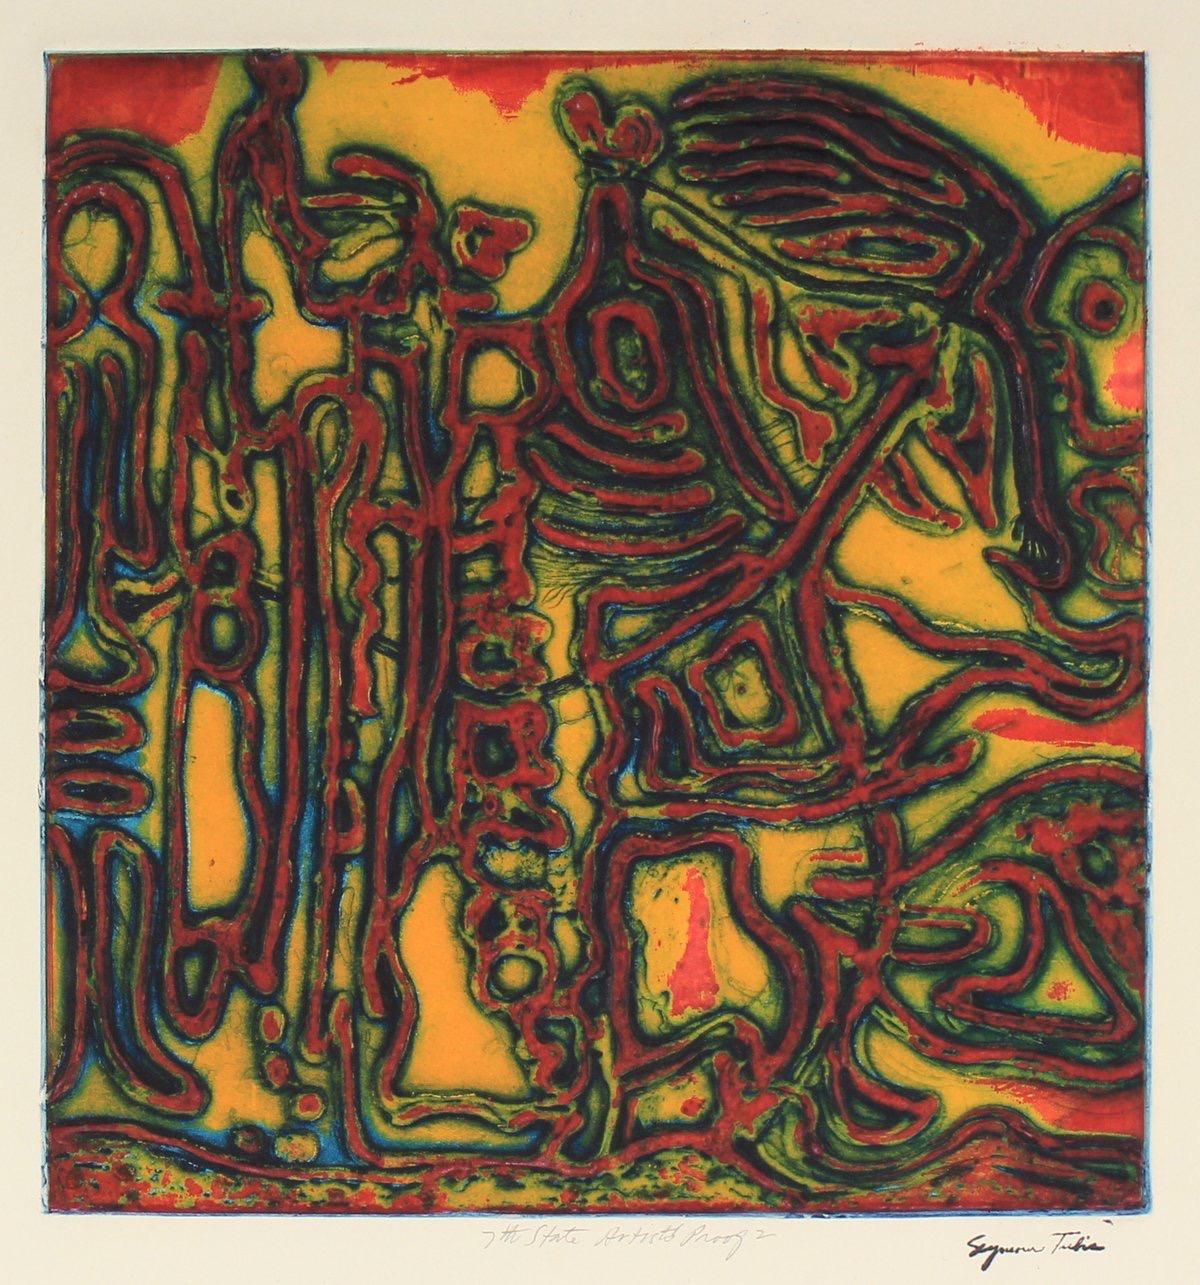 Seymour Tubis Abstract Print - "Flight of the Female Chauvinist" Collograph on Paper in Warm Colors